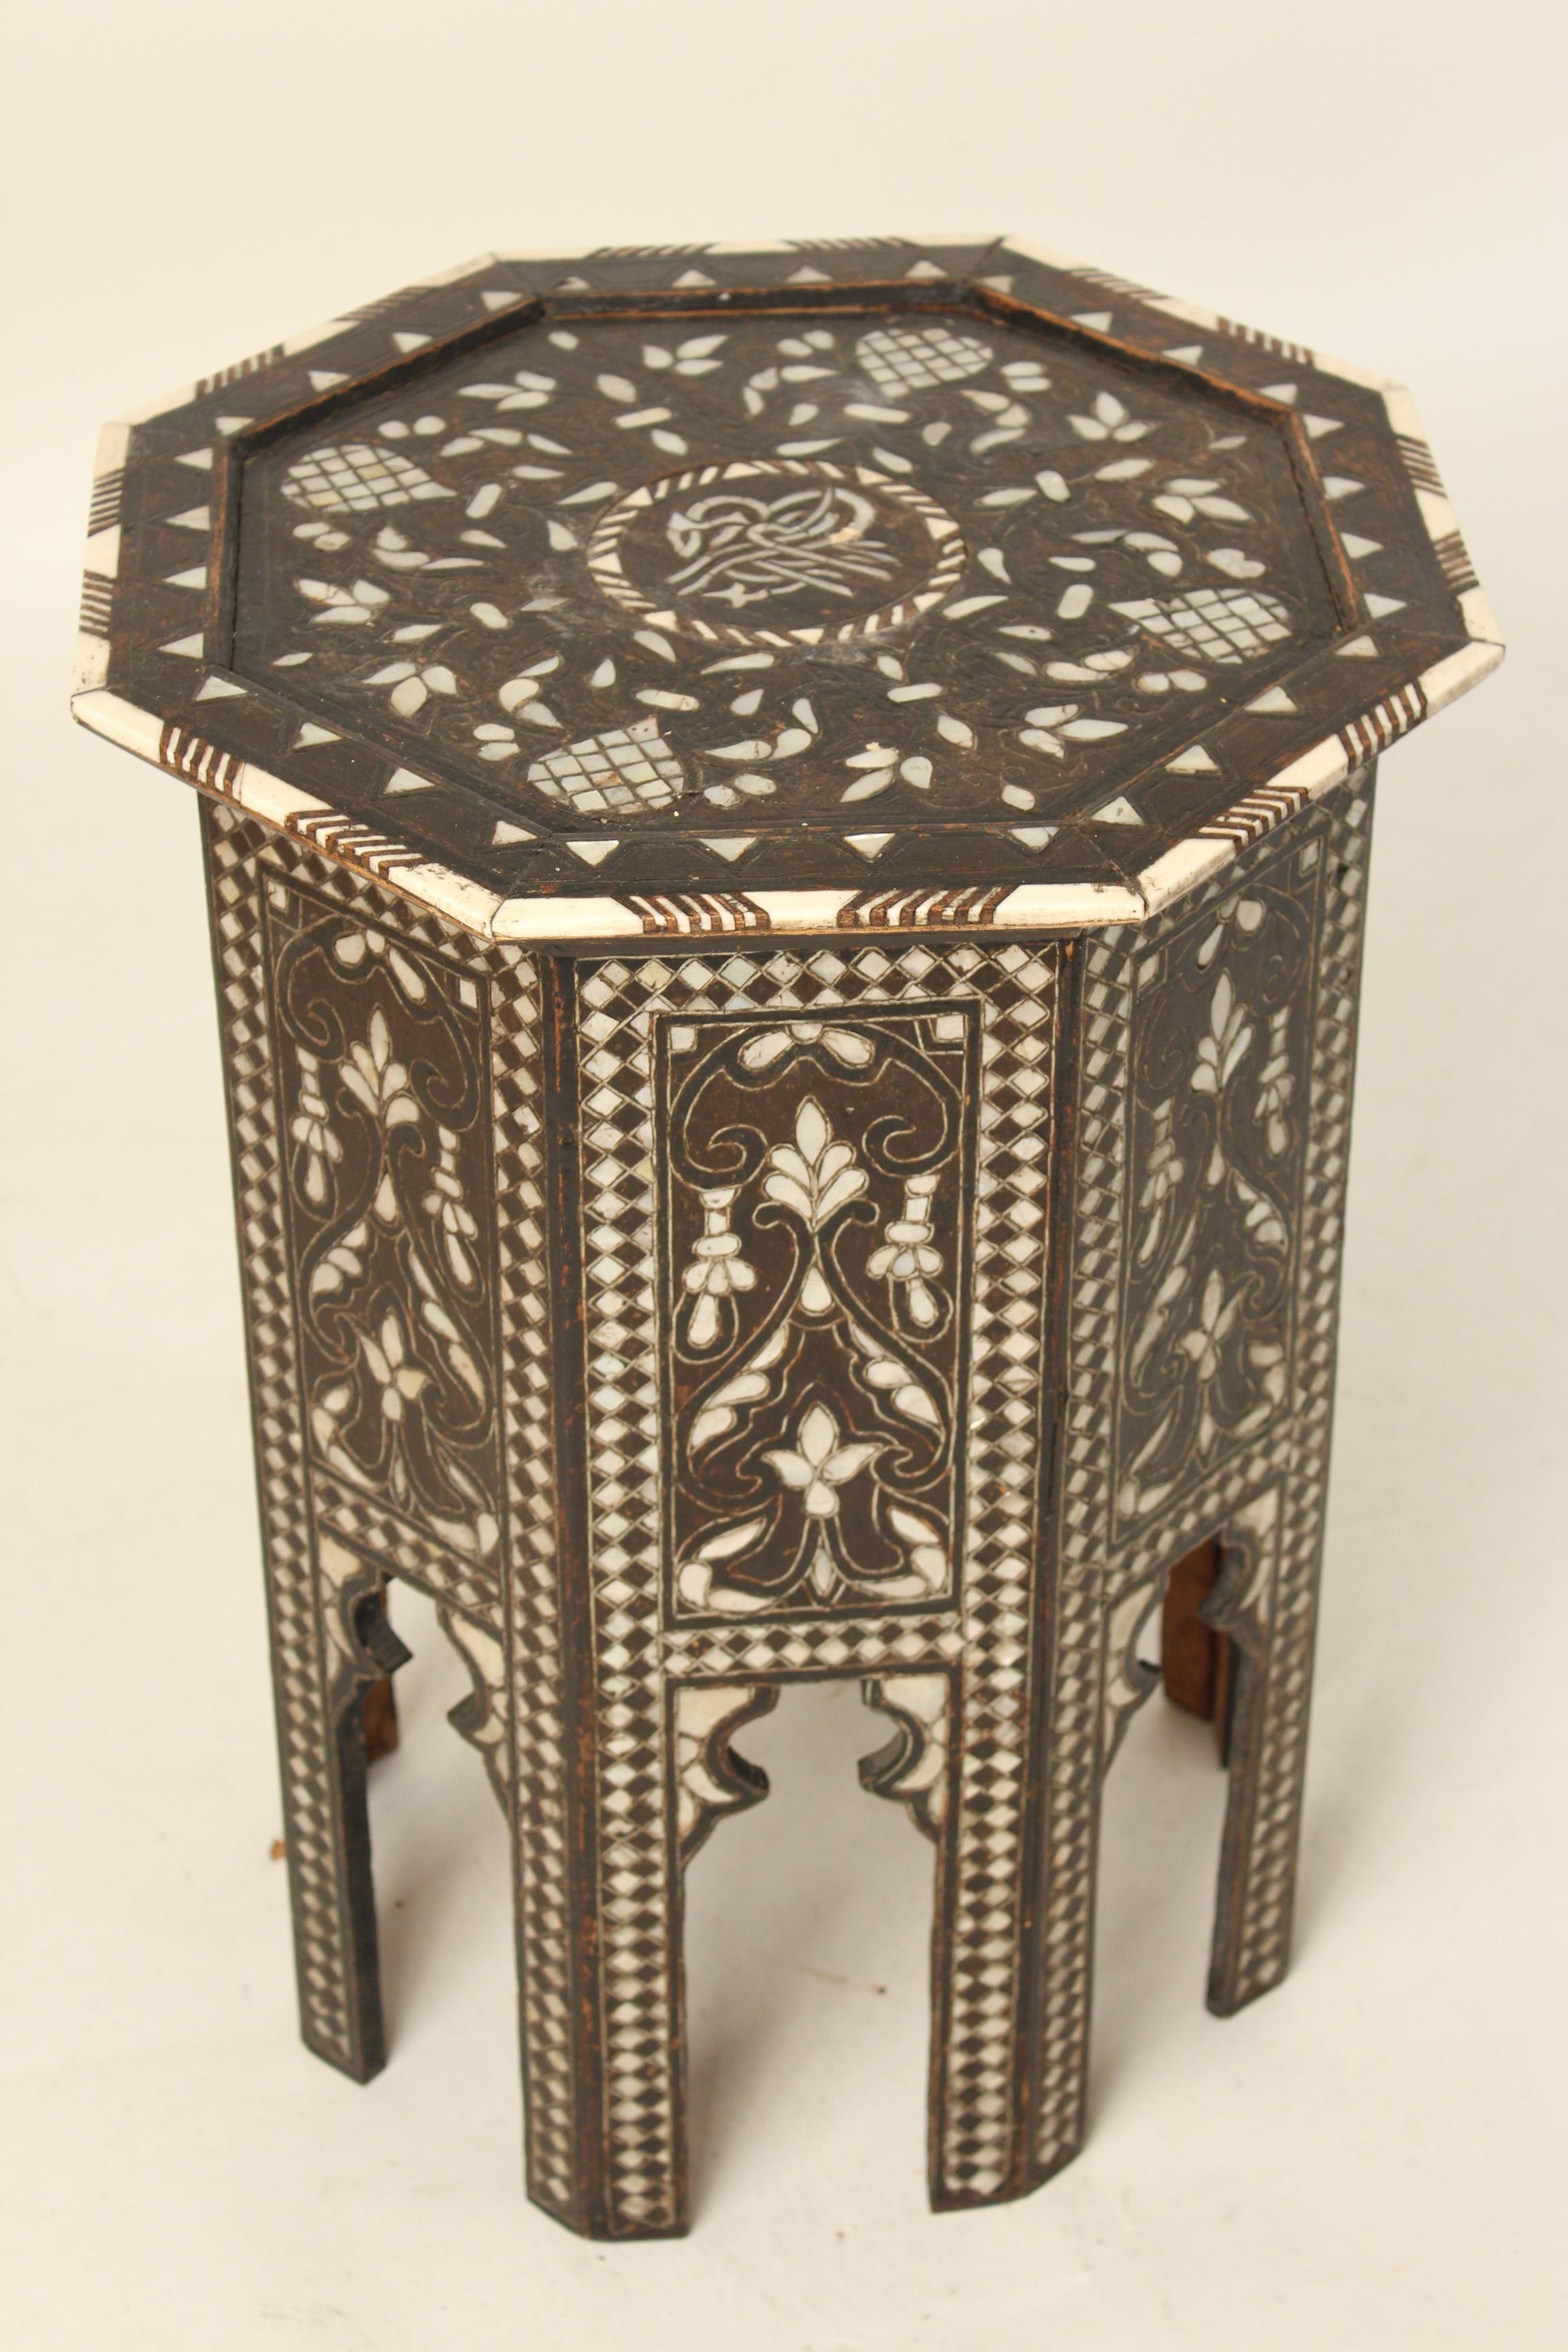 Middle Eastern mother of pearl and bone inlaid octagonal shaped occasional table, circa 1950.